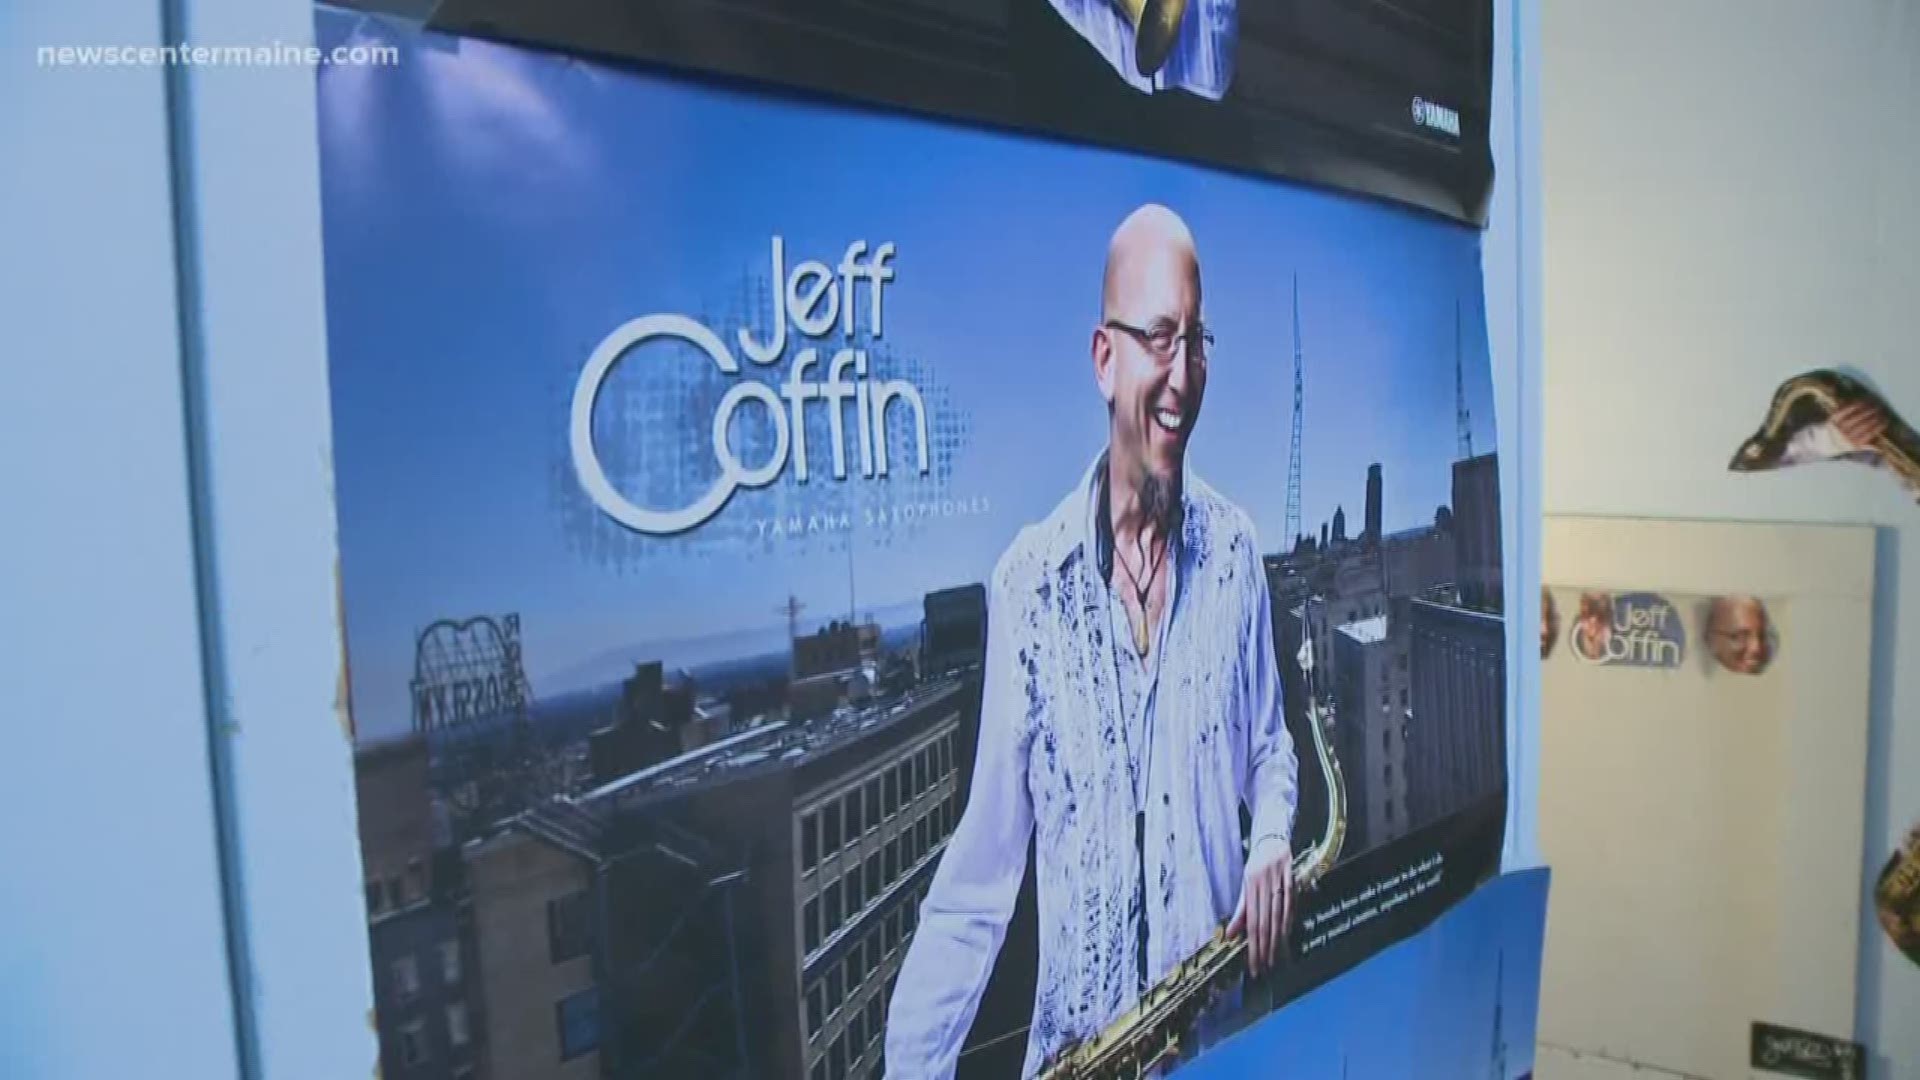 Jeff Coffin from Dexter, Maine has a successful solo career and has toured with Dave Matthews Band. He takes time to teach Maine jazz students for three days.